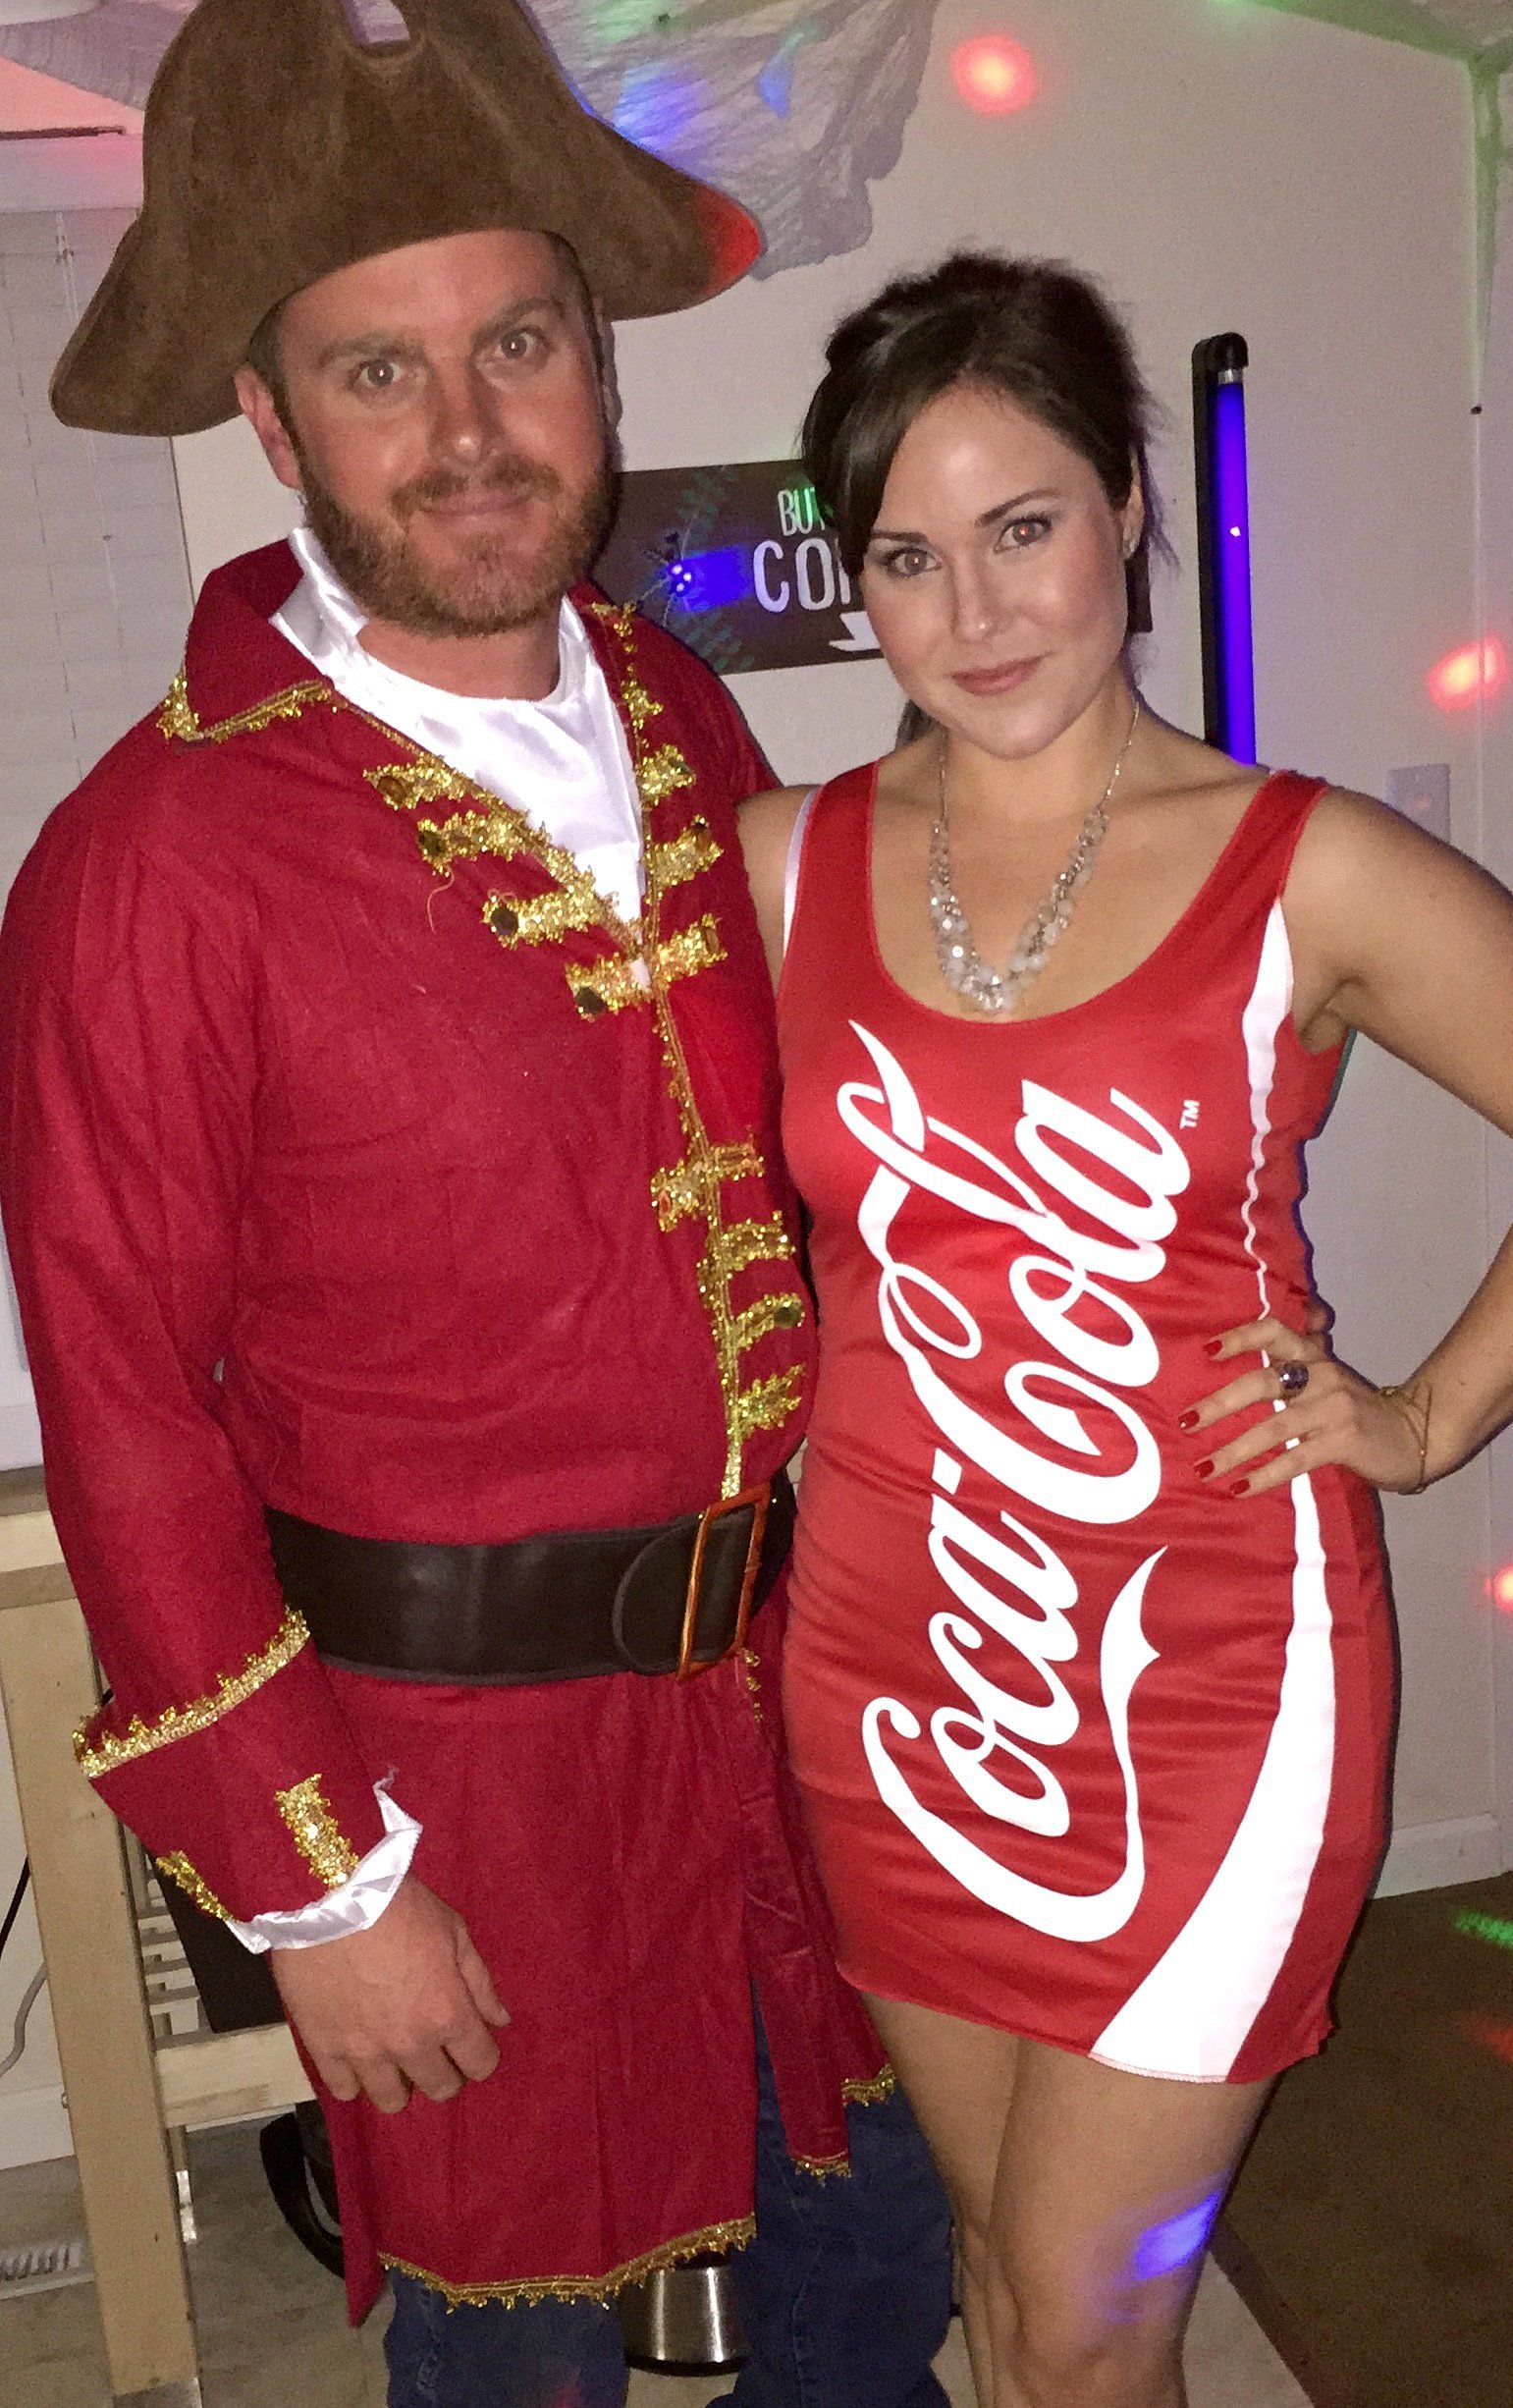 Captain And Coke 57 Easy Costume Ideas For Couples Popsugar Love And Sex